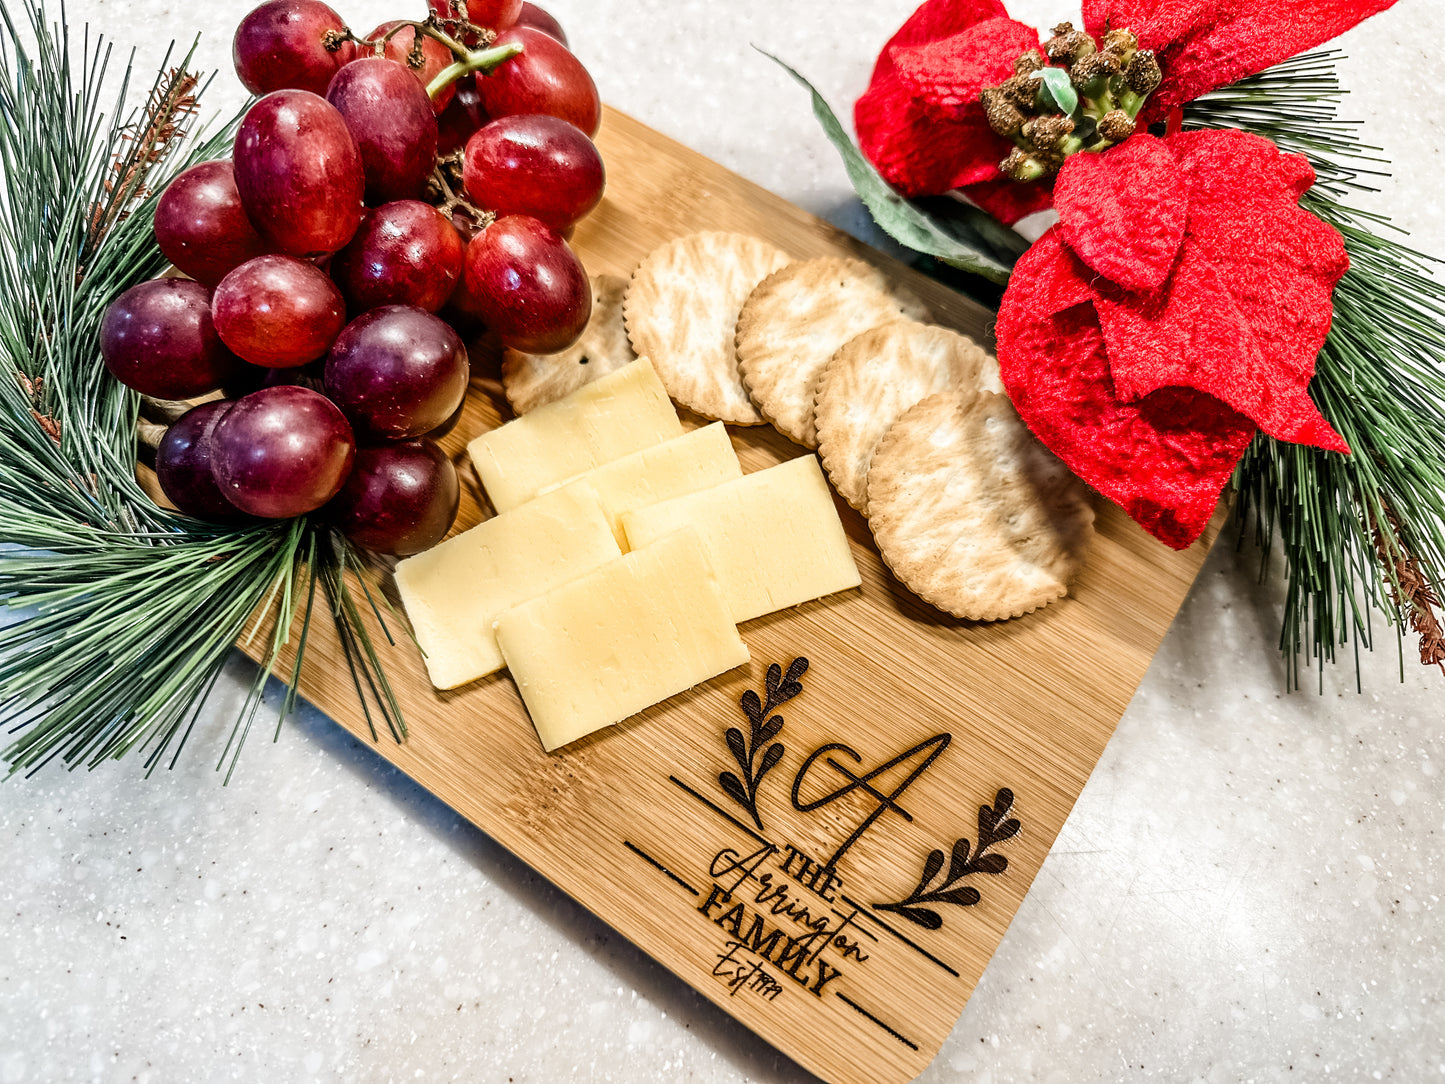 Personalized Name & Est. Date Cheese Board (approximate 9x6) 5-7 DAY TAT